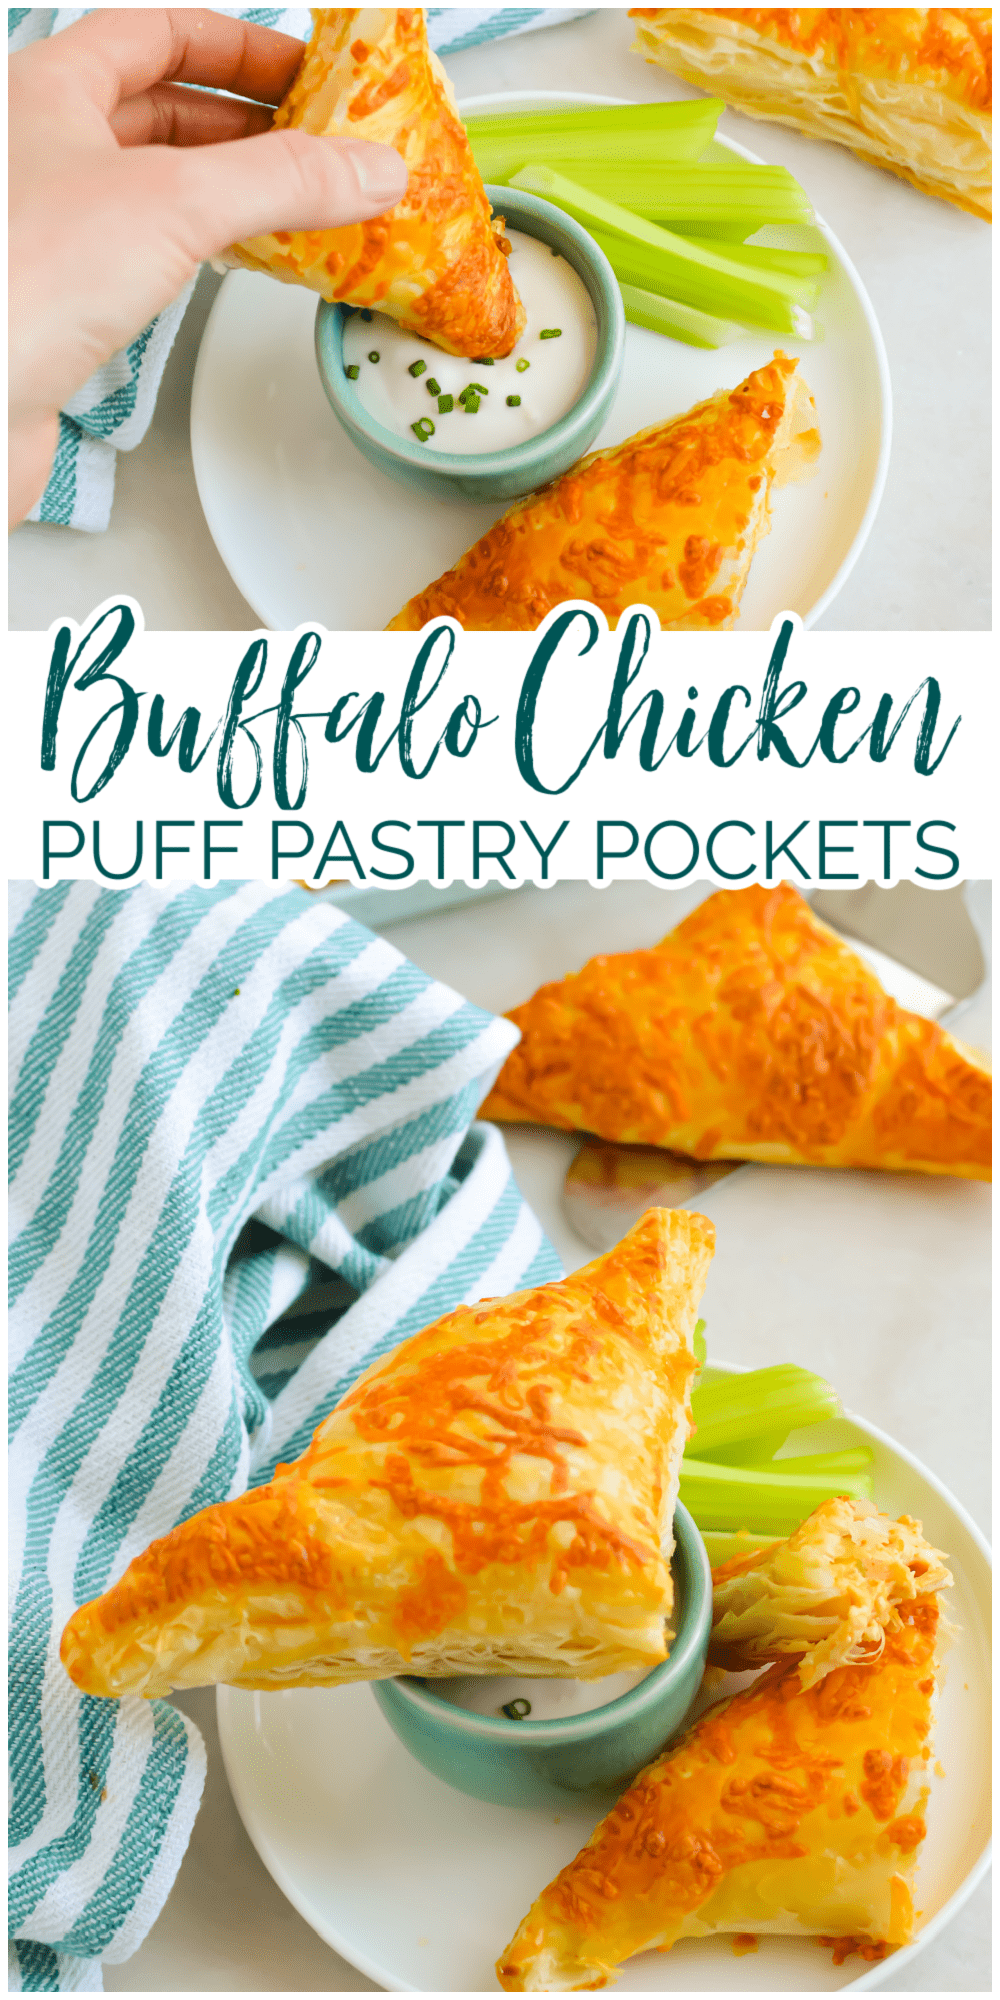 Buffalo Chicken Puff Pastry Pockets are creamy and cheesy on the inside and flaky on the outside. They're the perfect party snack! #ad #amazingmadeeasy #jusrol #puff via @jugglingactmama